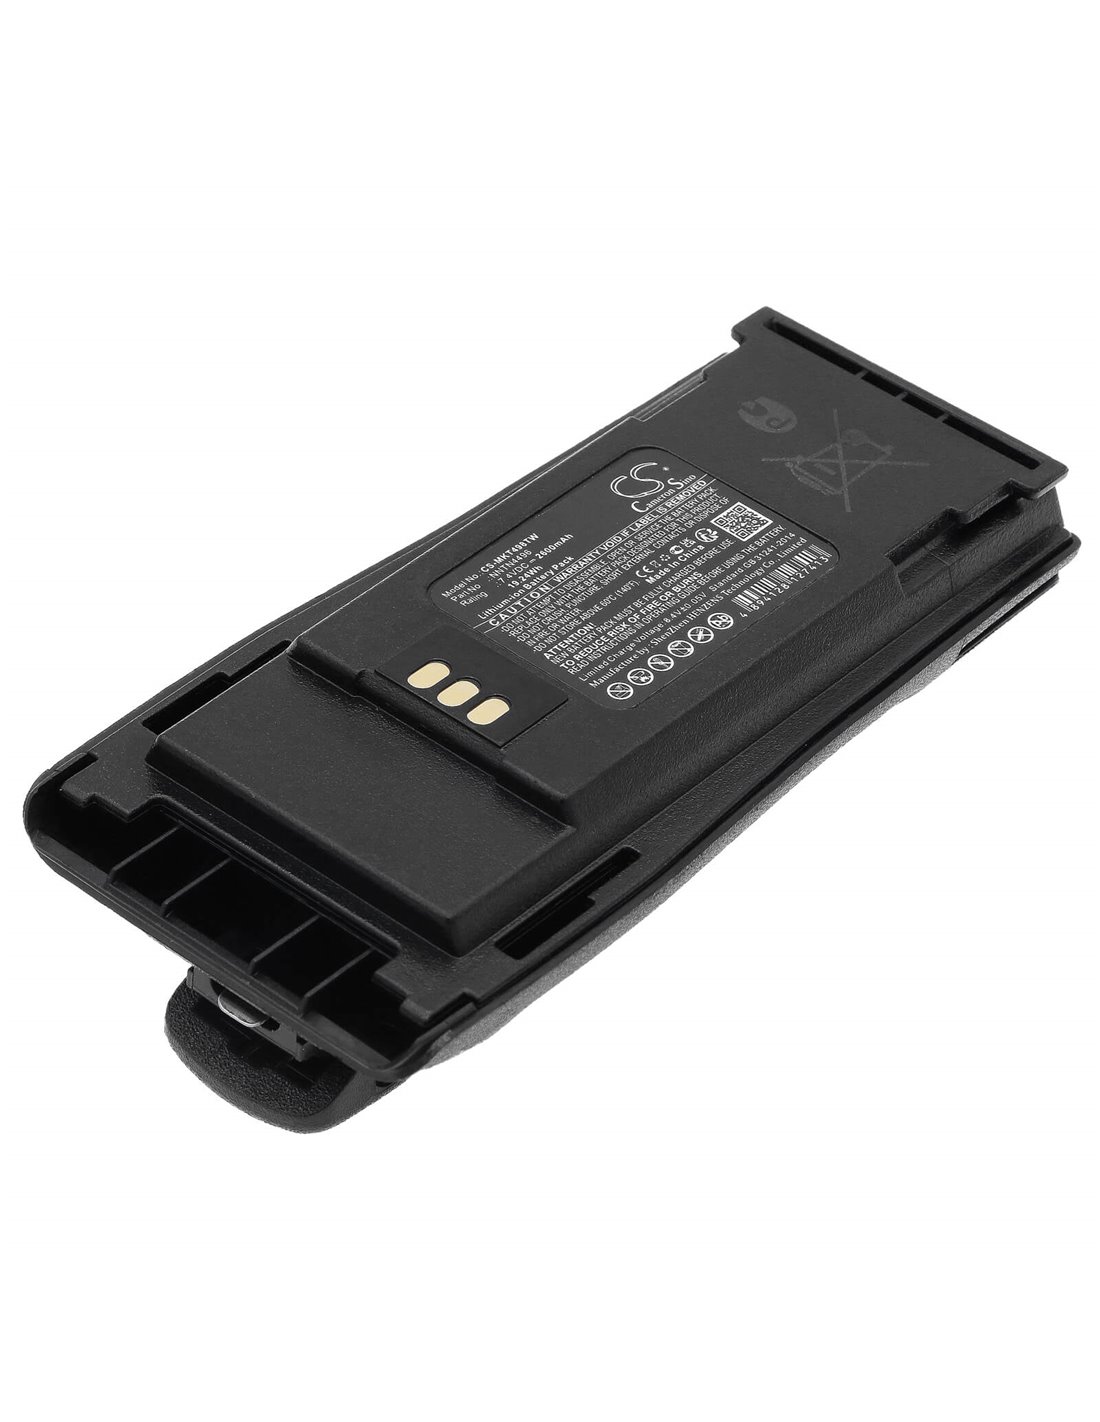 Li-ion Battery, With Sanyo Cells for Motorola Cp150, Cp200, Cp250 7.2V, 2600mAh - 18.72Wh